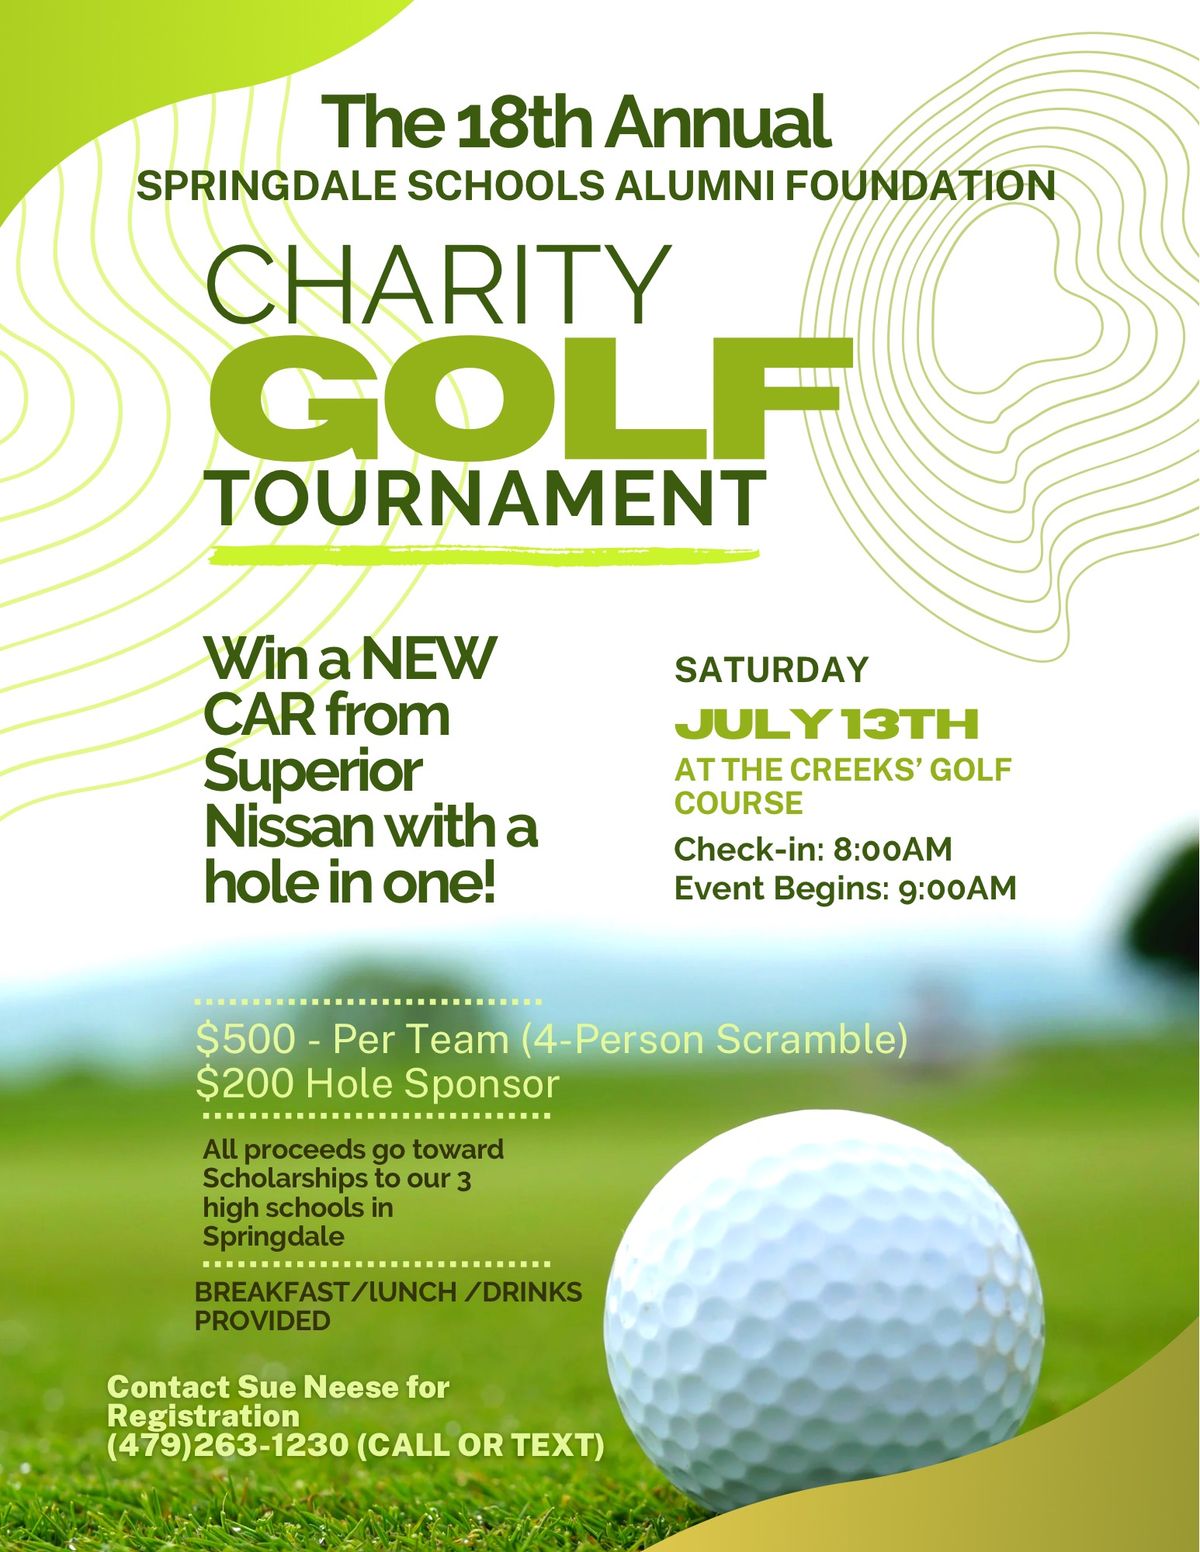 18th annual SSAF Charity Golf Tournament